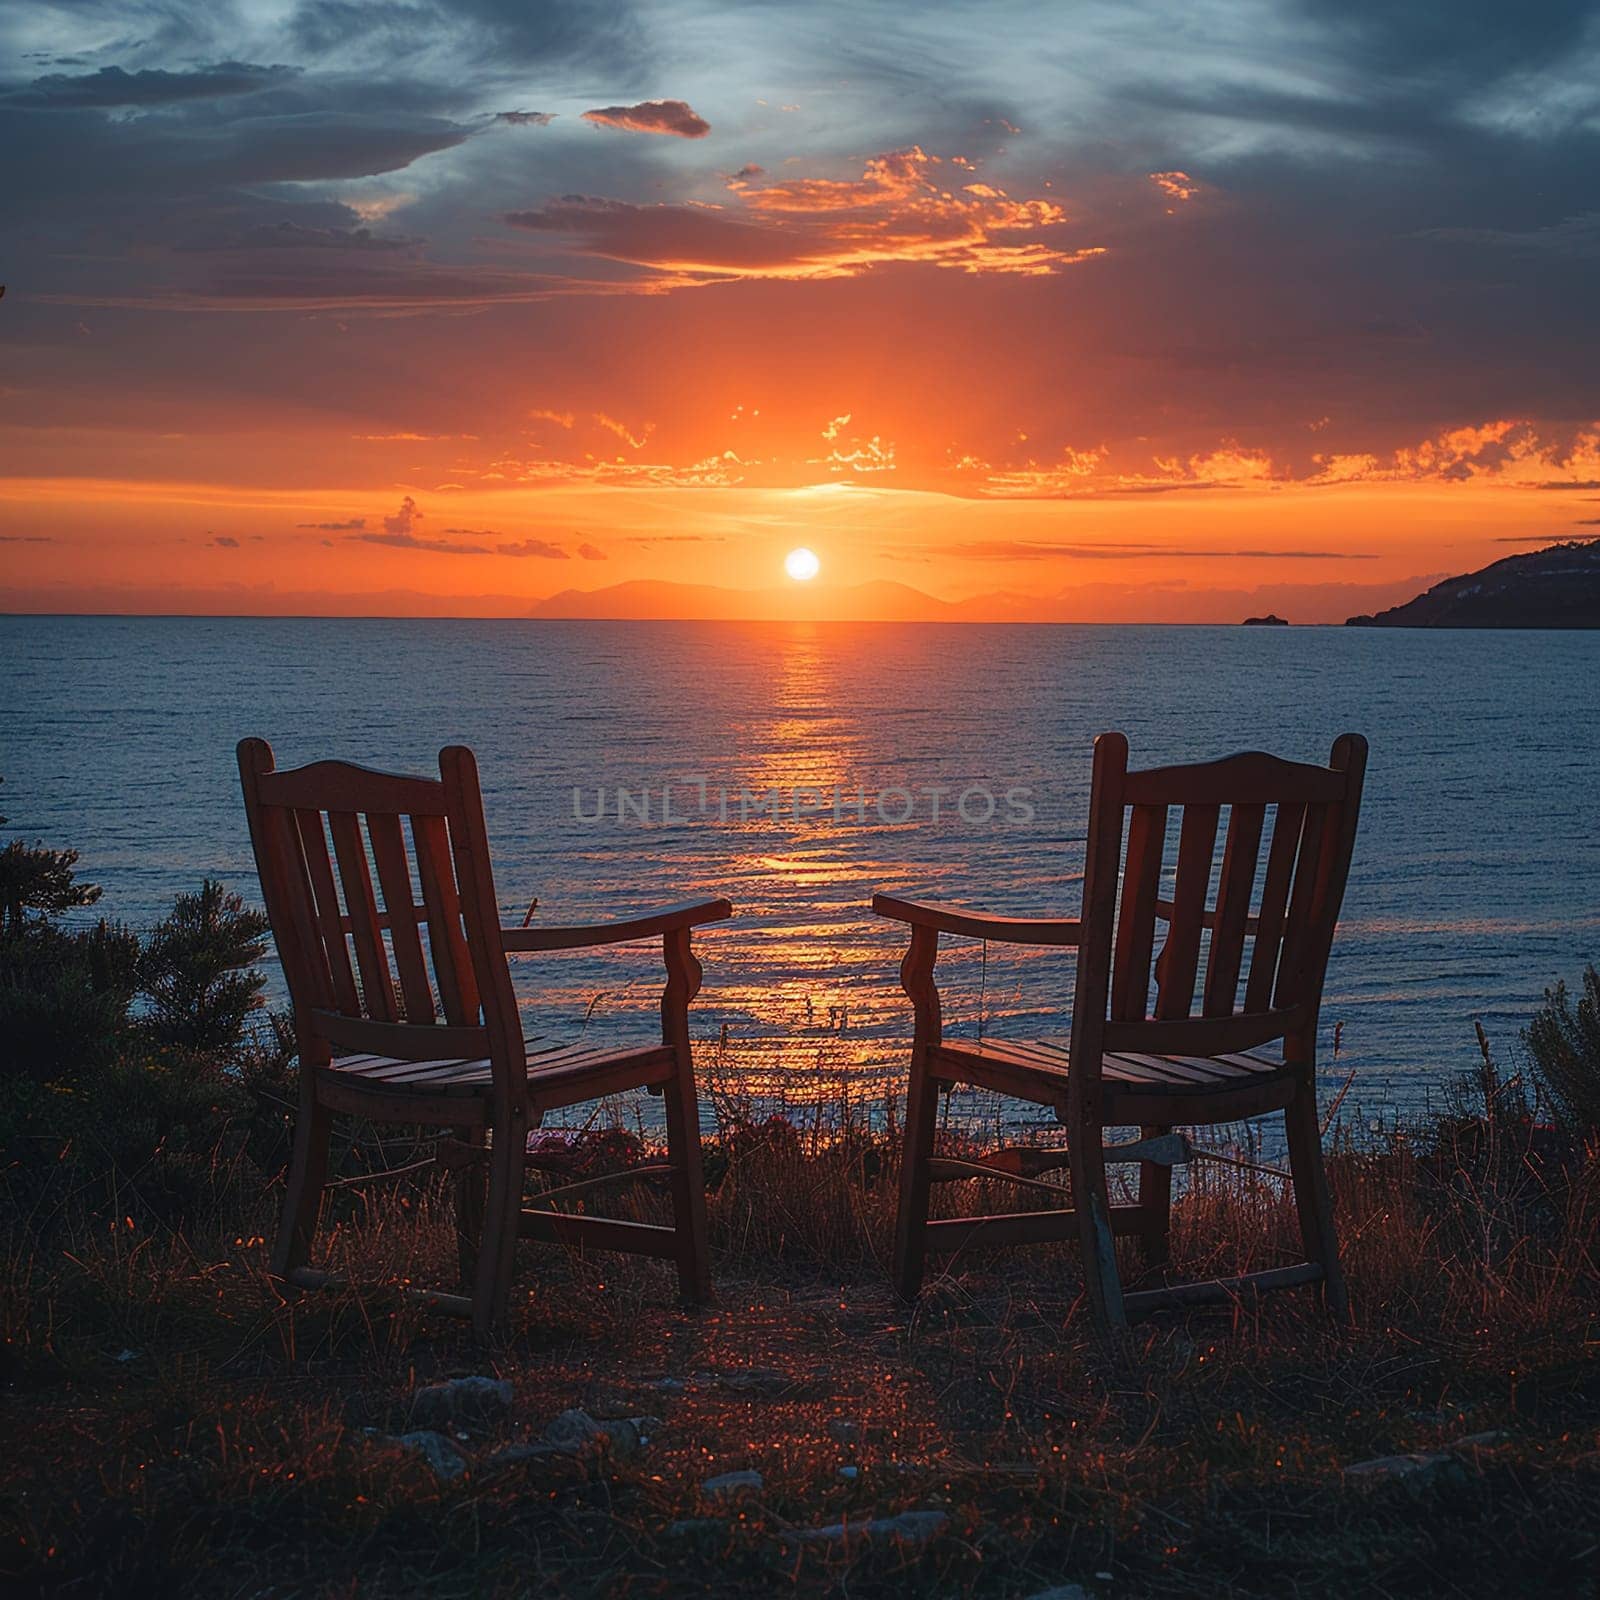 Pair of empty chairs facing sunset, subtle celebration of companionship on White Day.